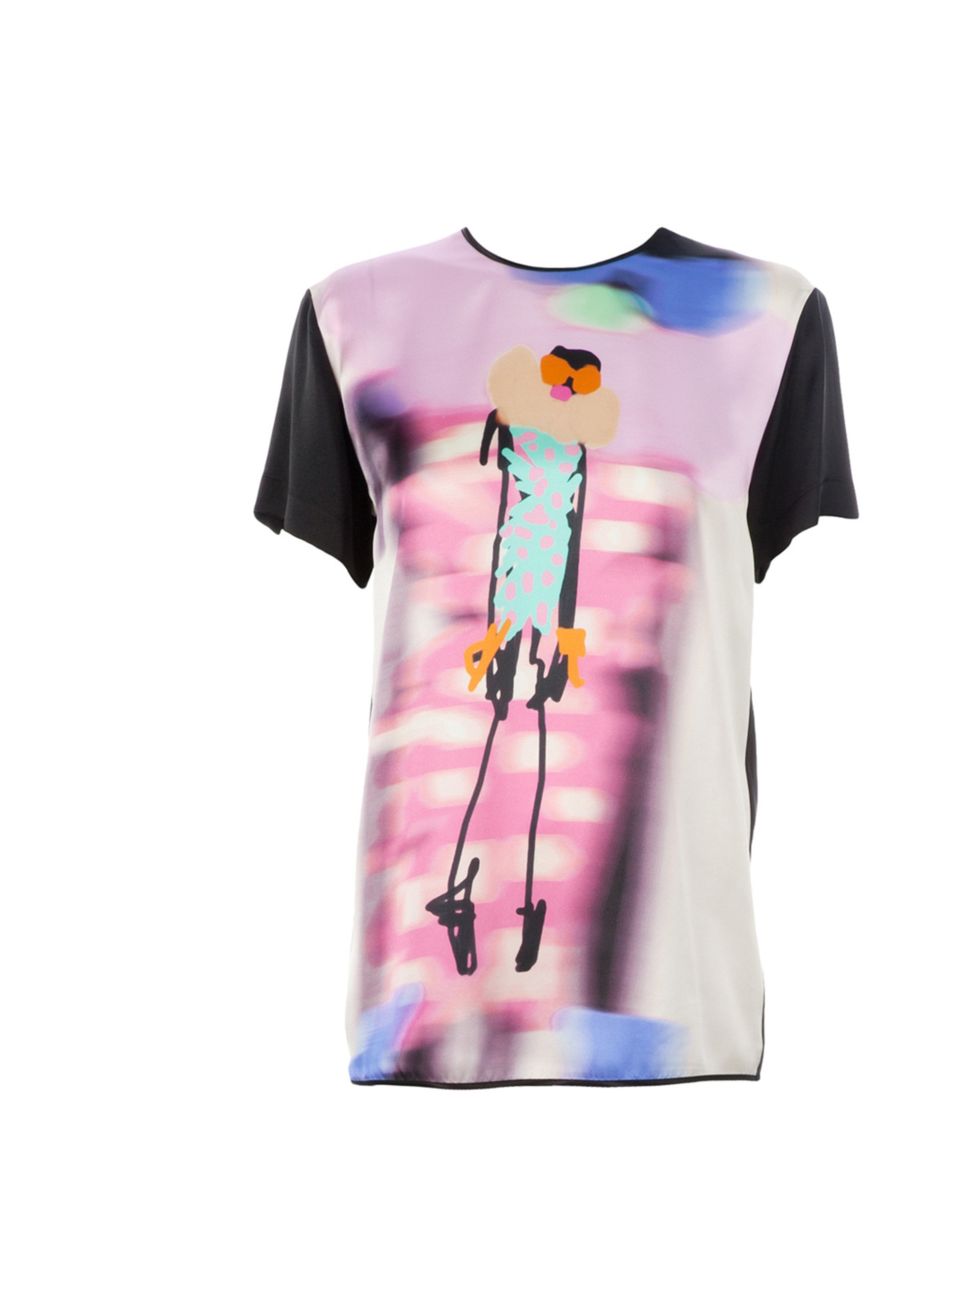 <p>Giles printed T-shirt, £314, at farfetch</p><p><a href="http://shopping.elleuk.com/browse?fts=giles+printed+t-shirt">BUY NOW</a></p>